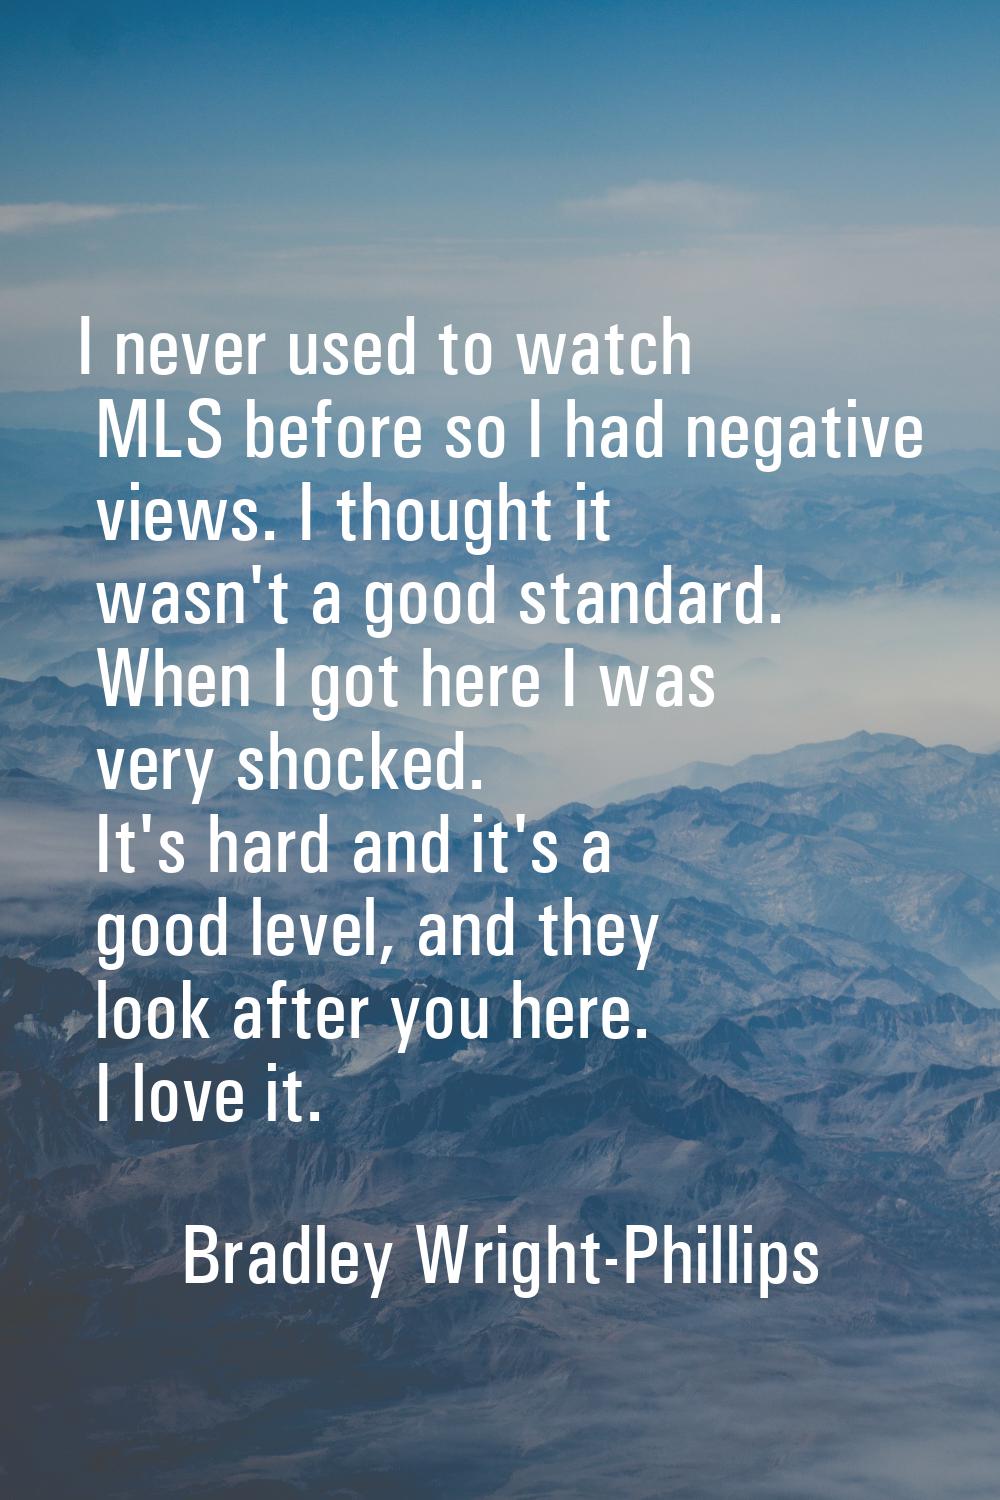 I never used to watch MLS before so I had negative views. I thought it wasn't a good standard. When